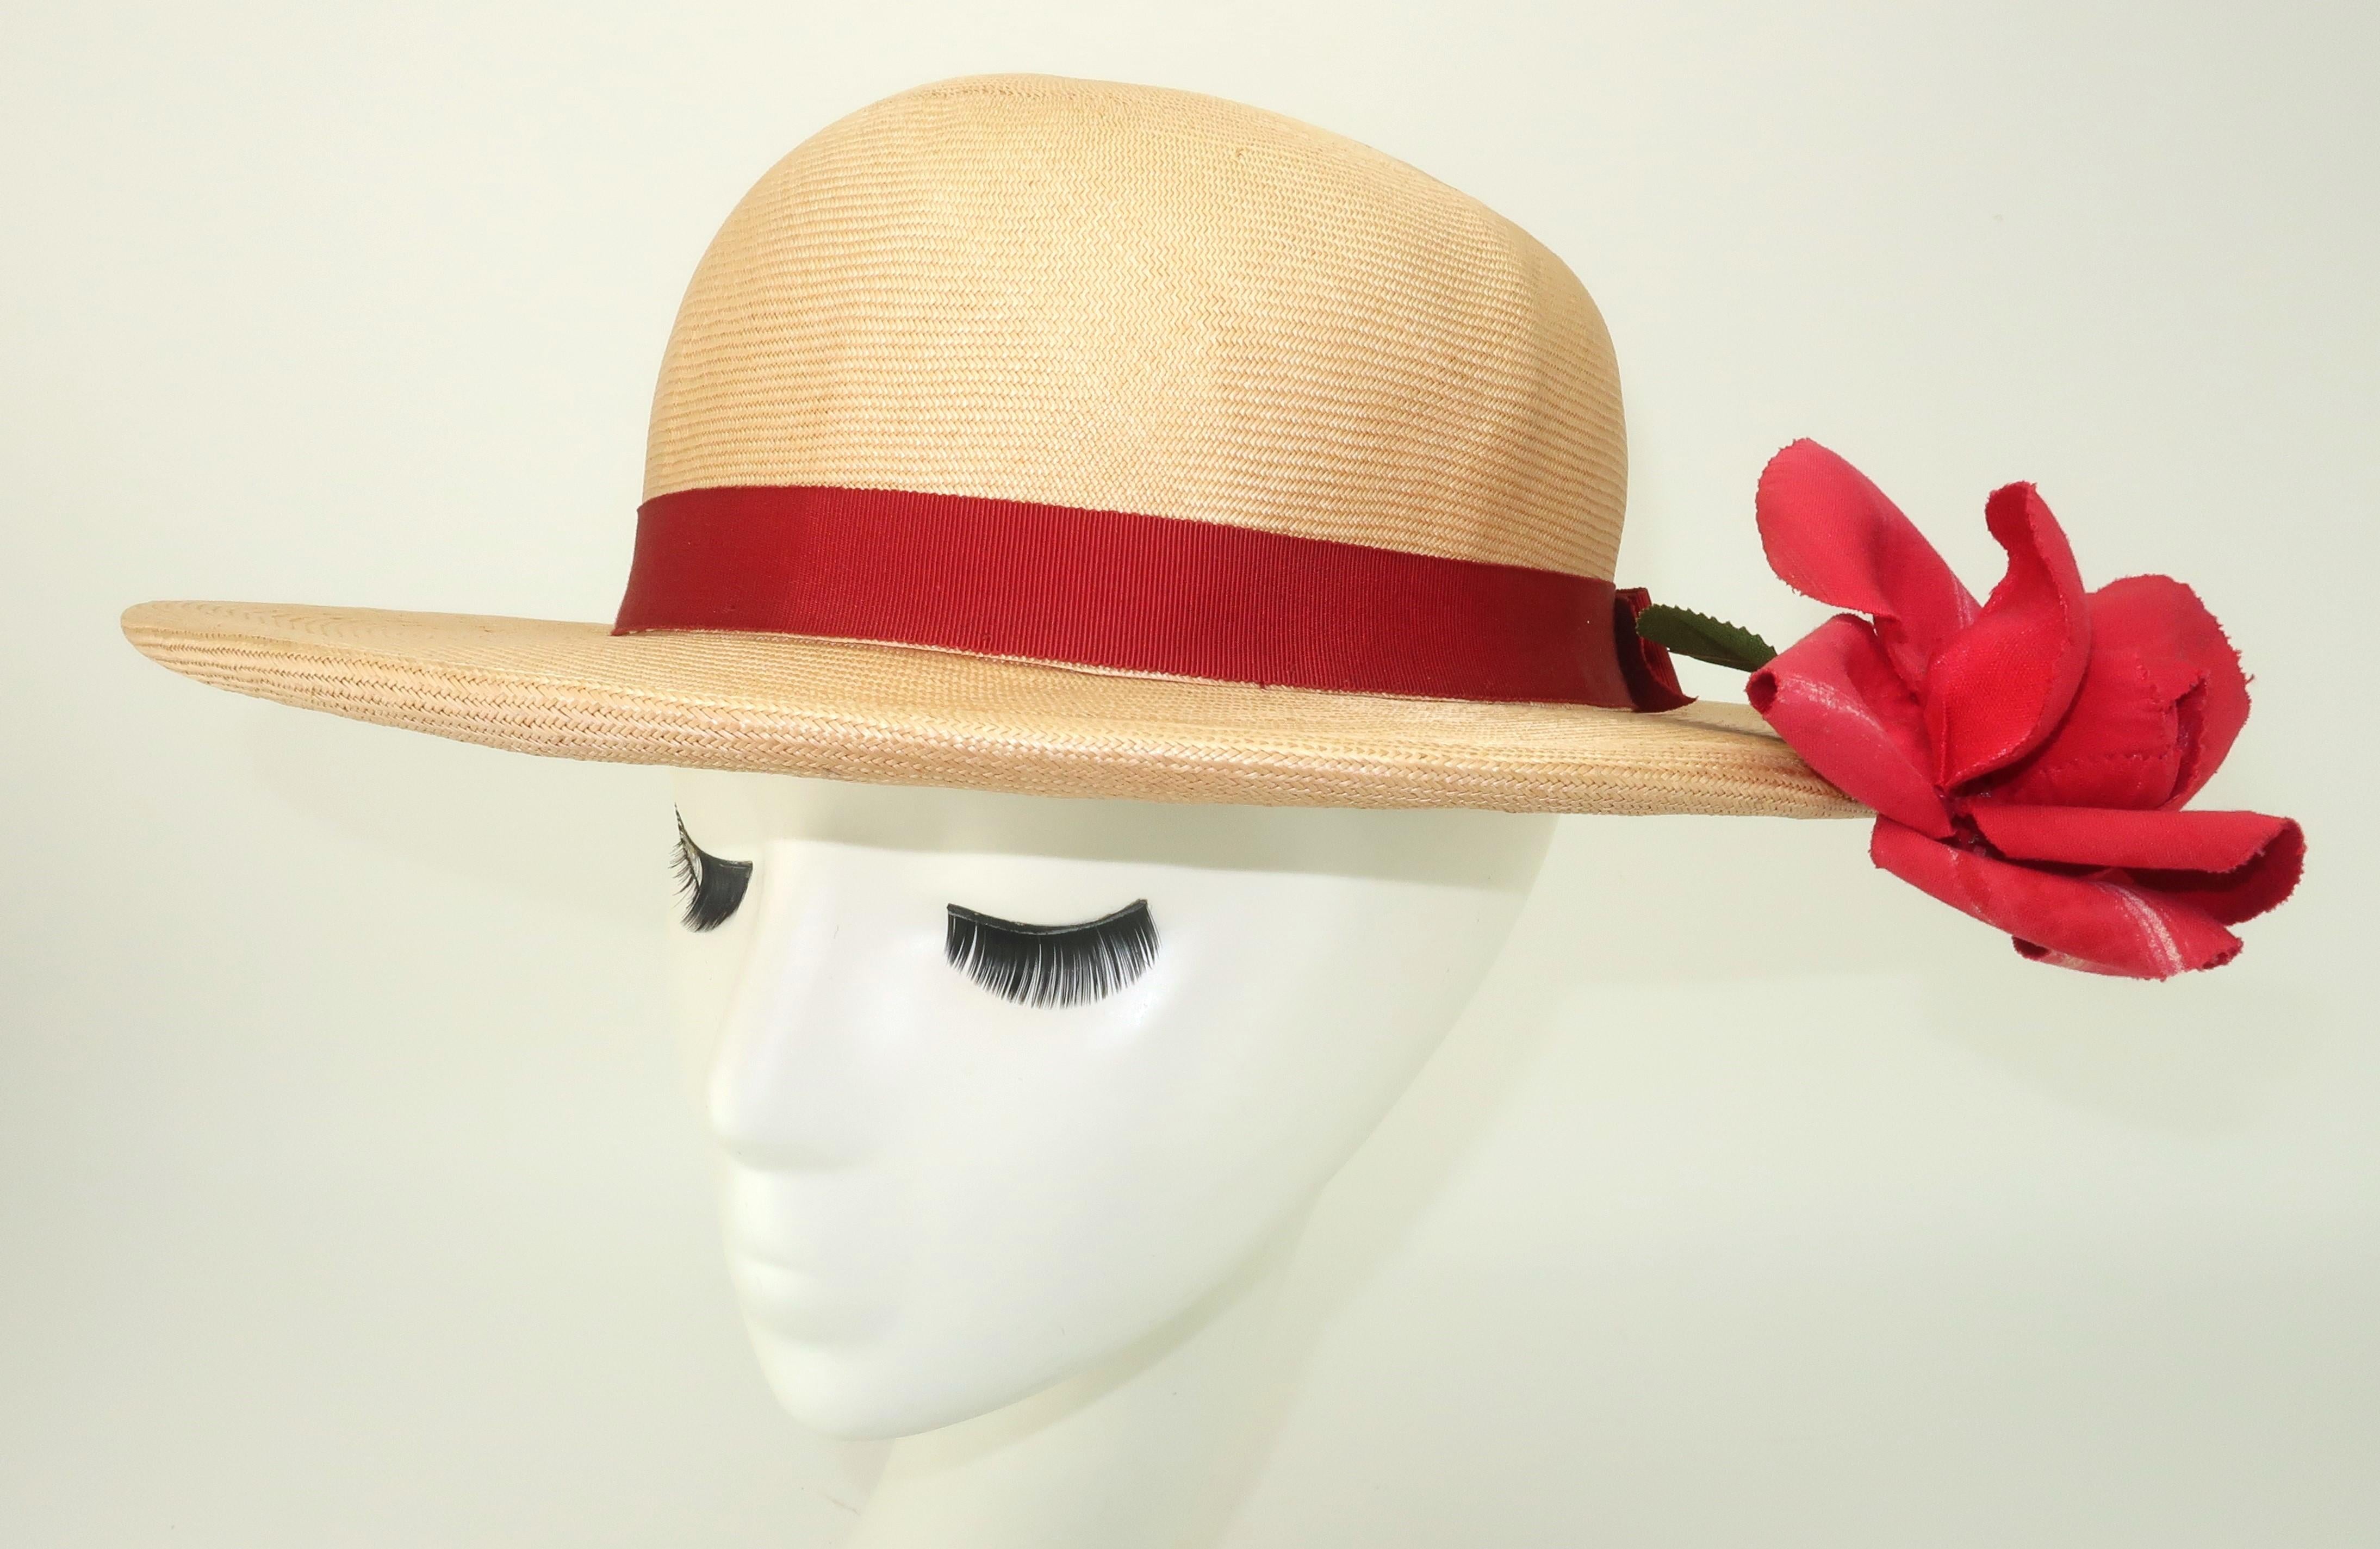 1950’s Dolly Madison natural straw hat with red grosgrain band and bow accented with a red rose.  This clever hat has a charming surprise … the rose appears to be growing from under the brim with just a hint of green leaves and a stem (yes, that